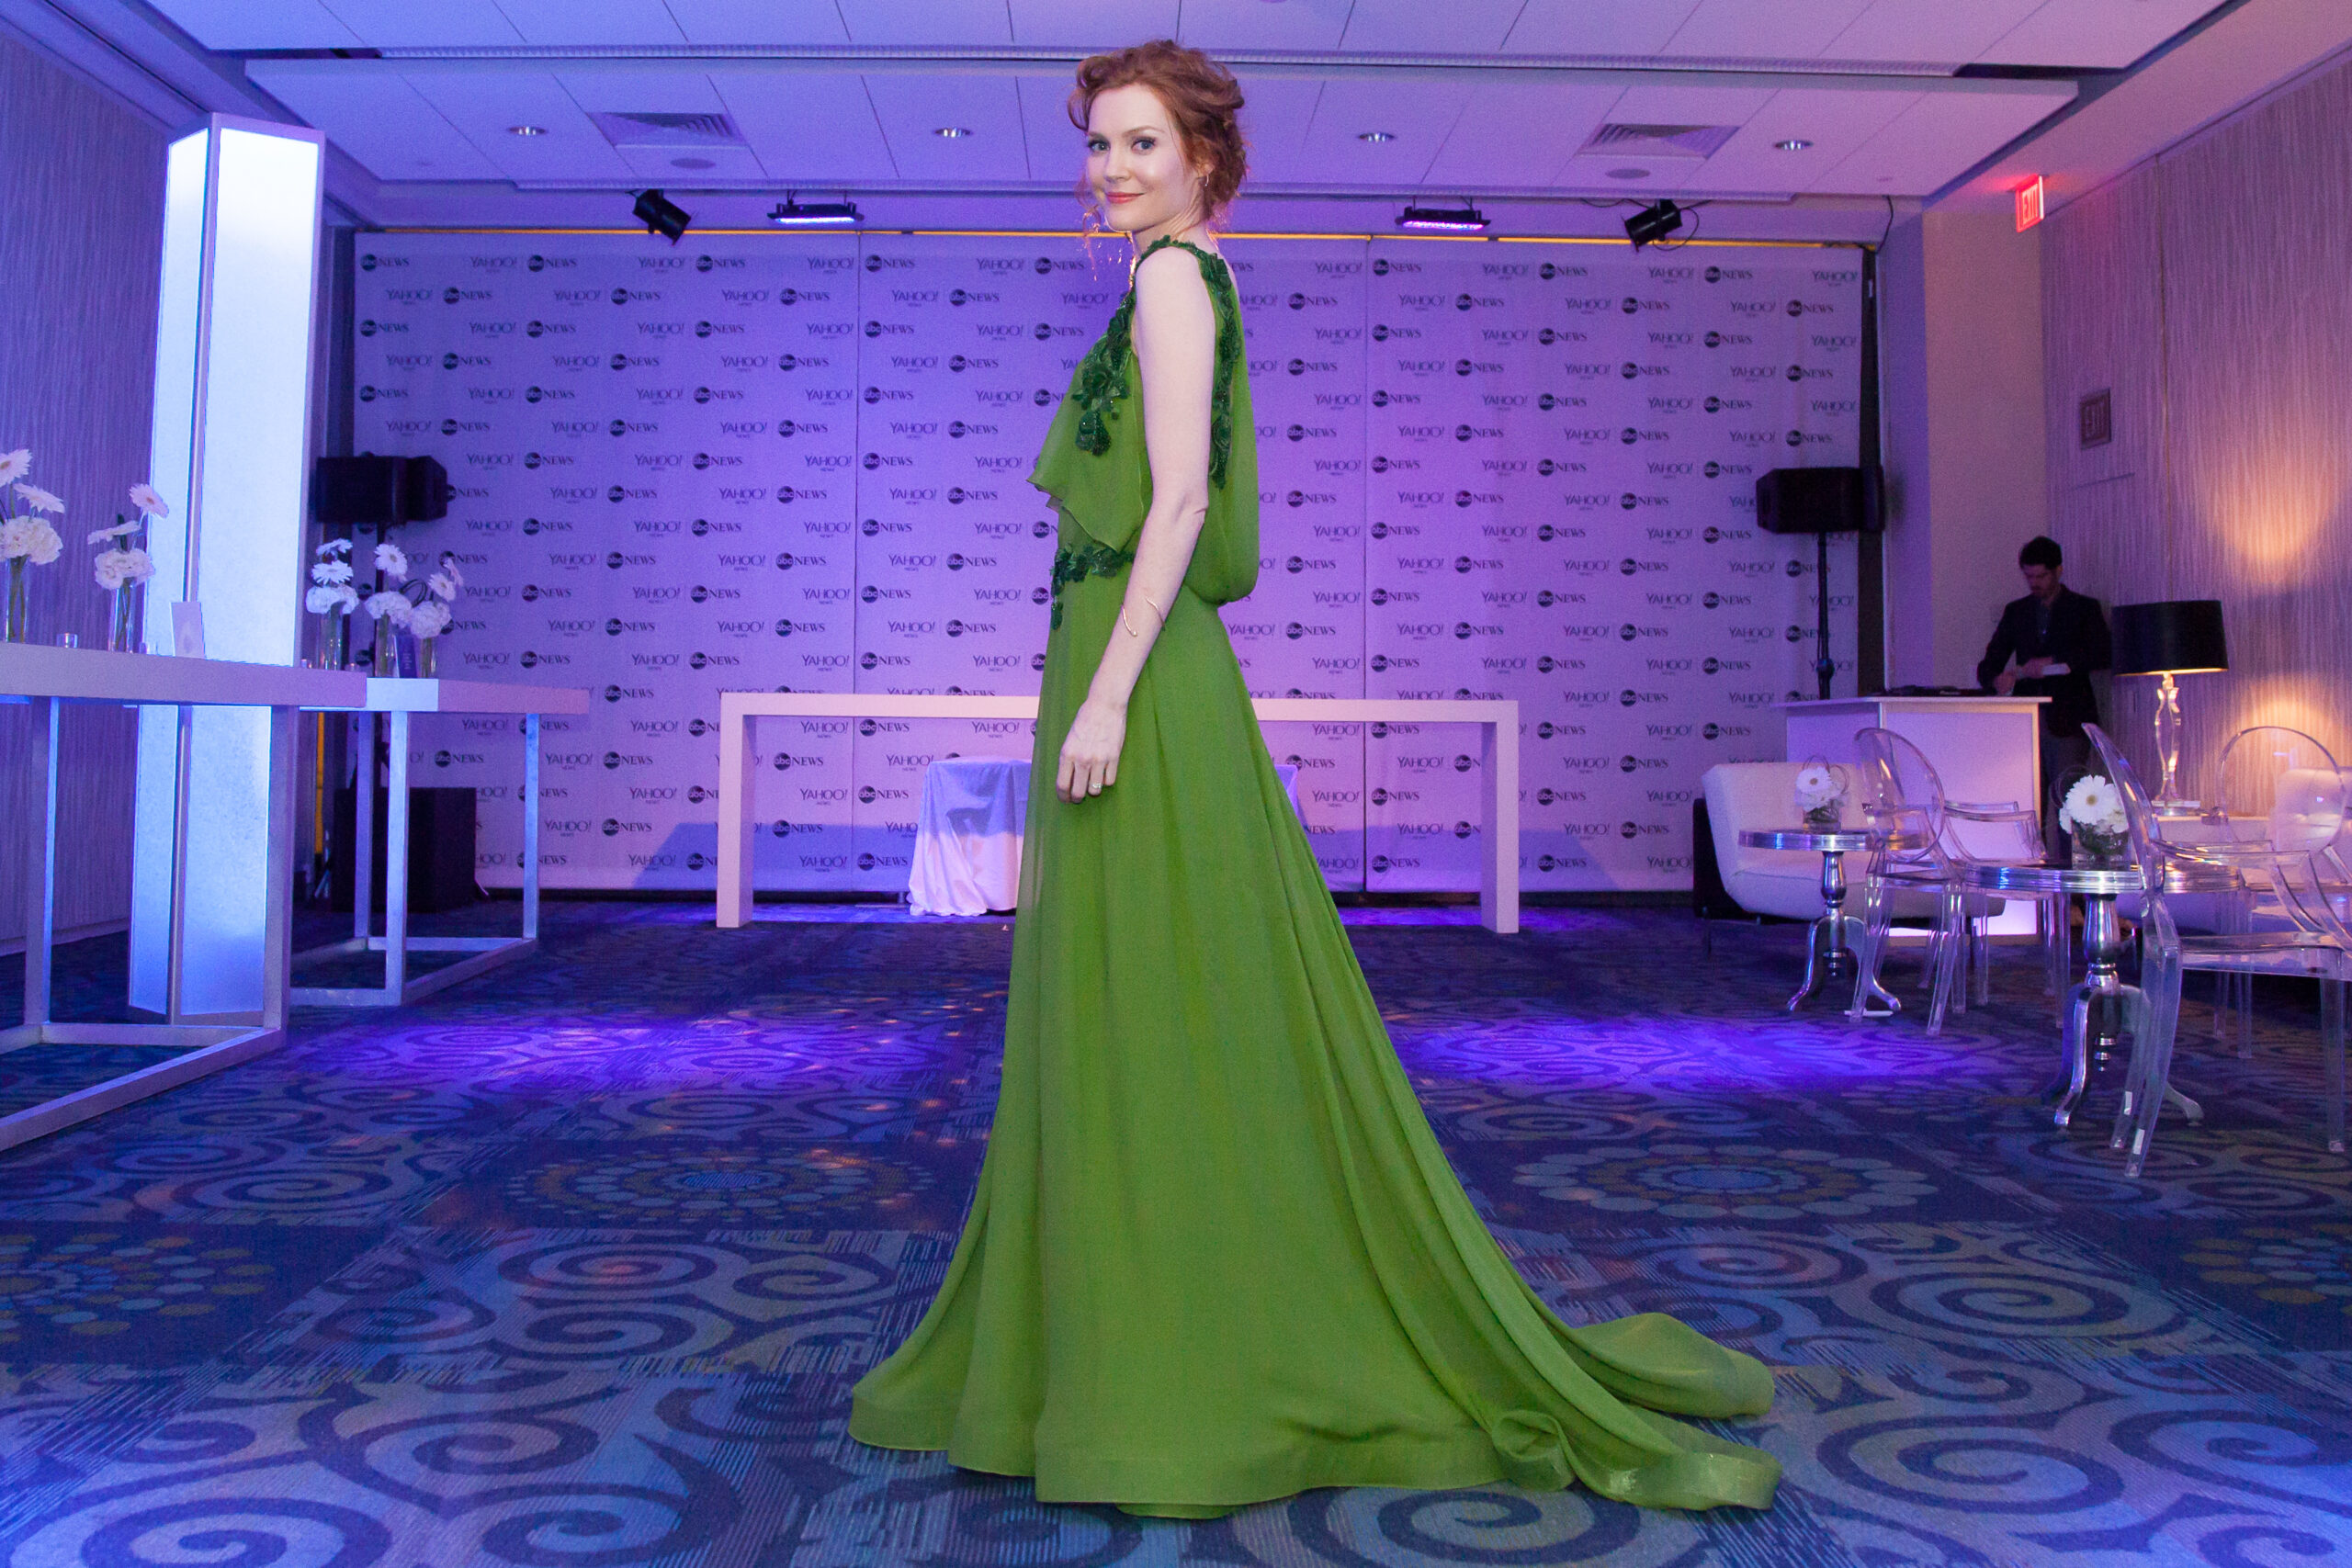 Darby Stanchfield at White House Correspondents Dinner